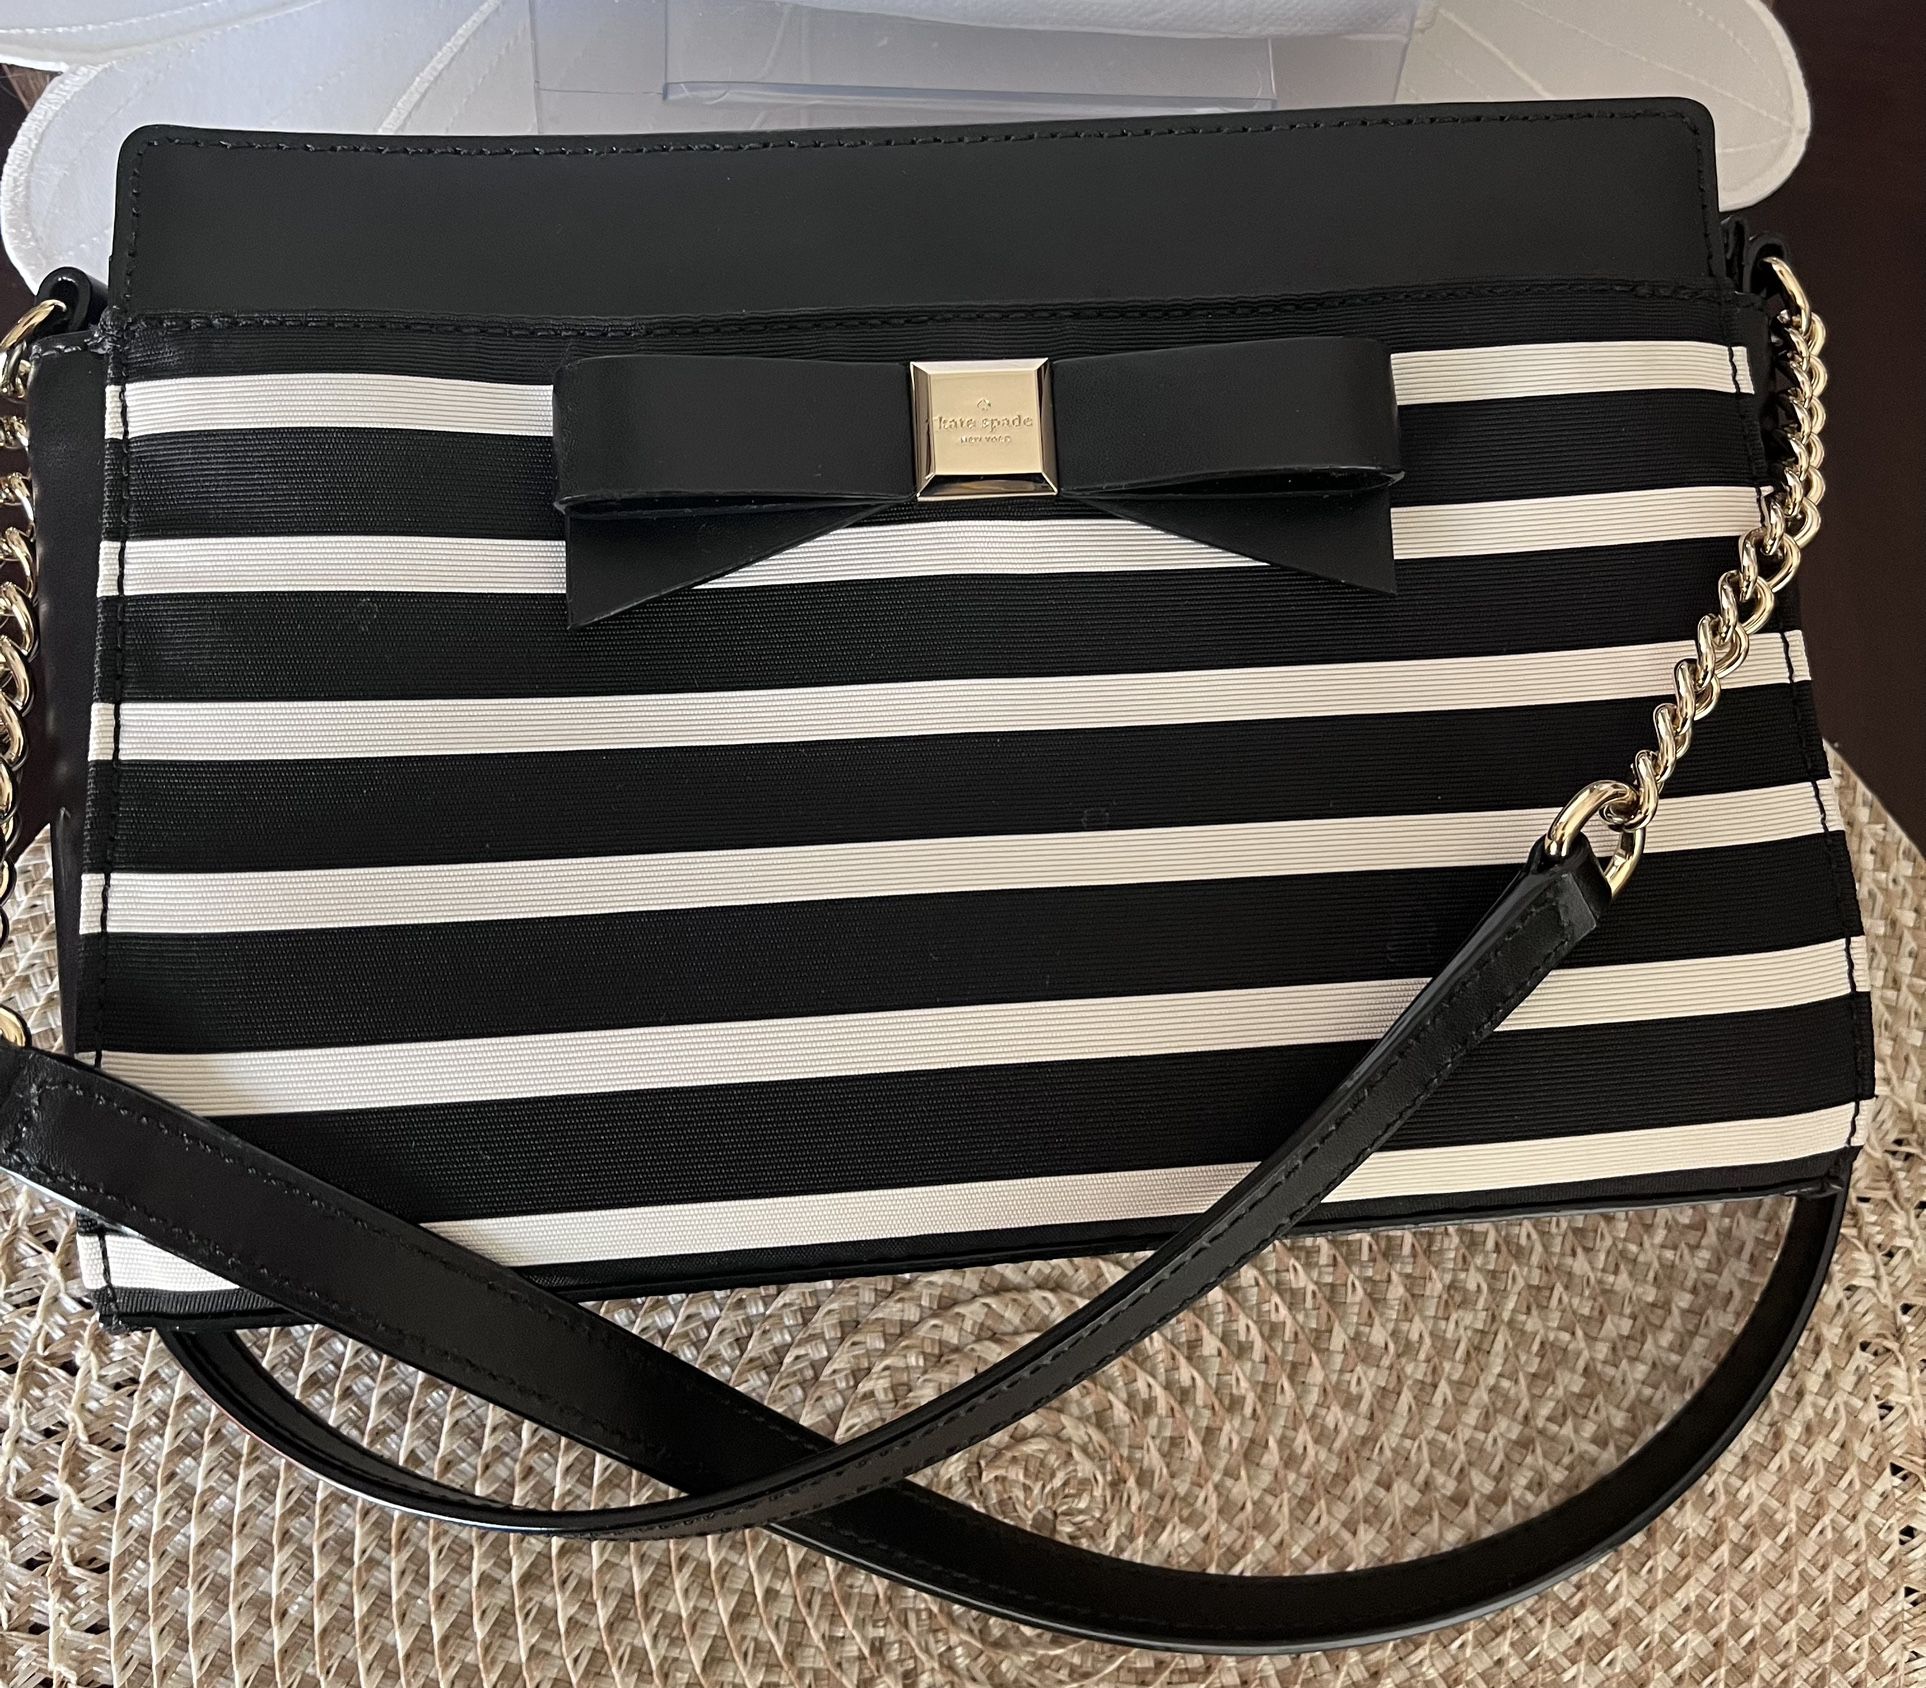 Kate Spade Crossbody Purse for Sale in Kansas City, MO - OfferUp